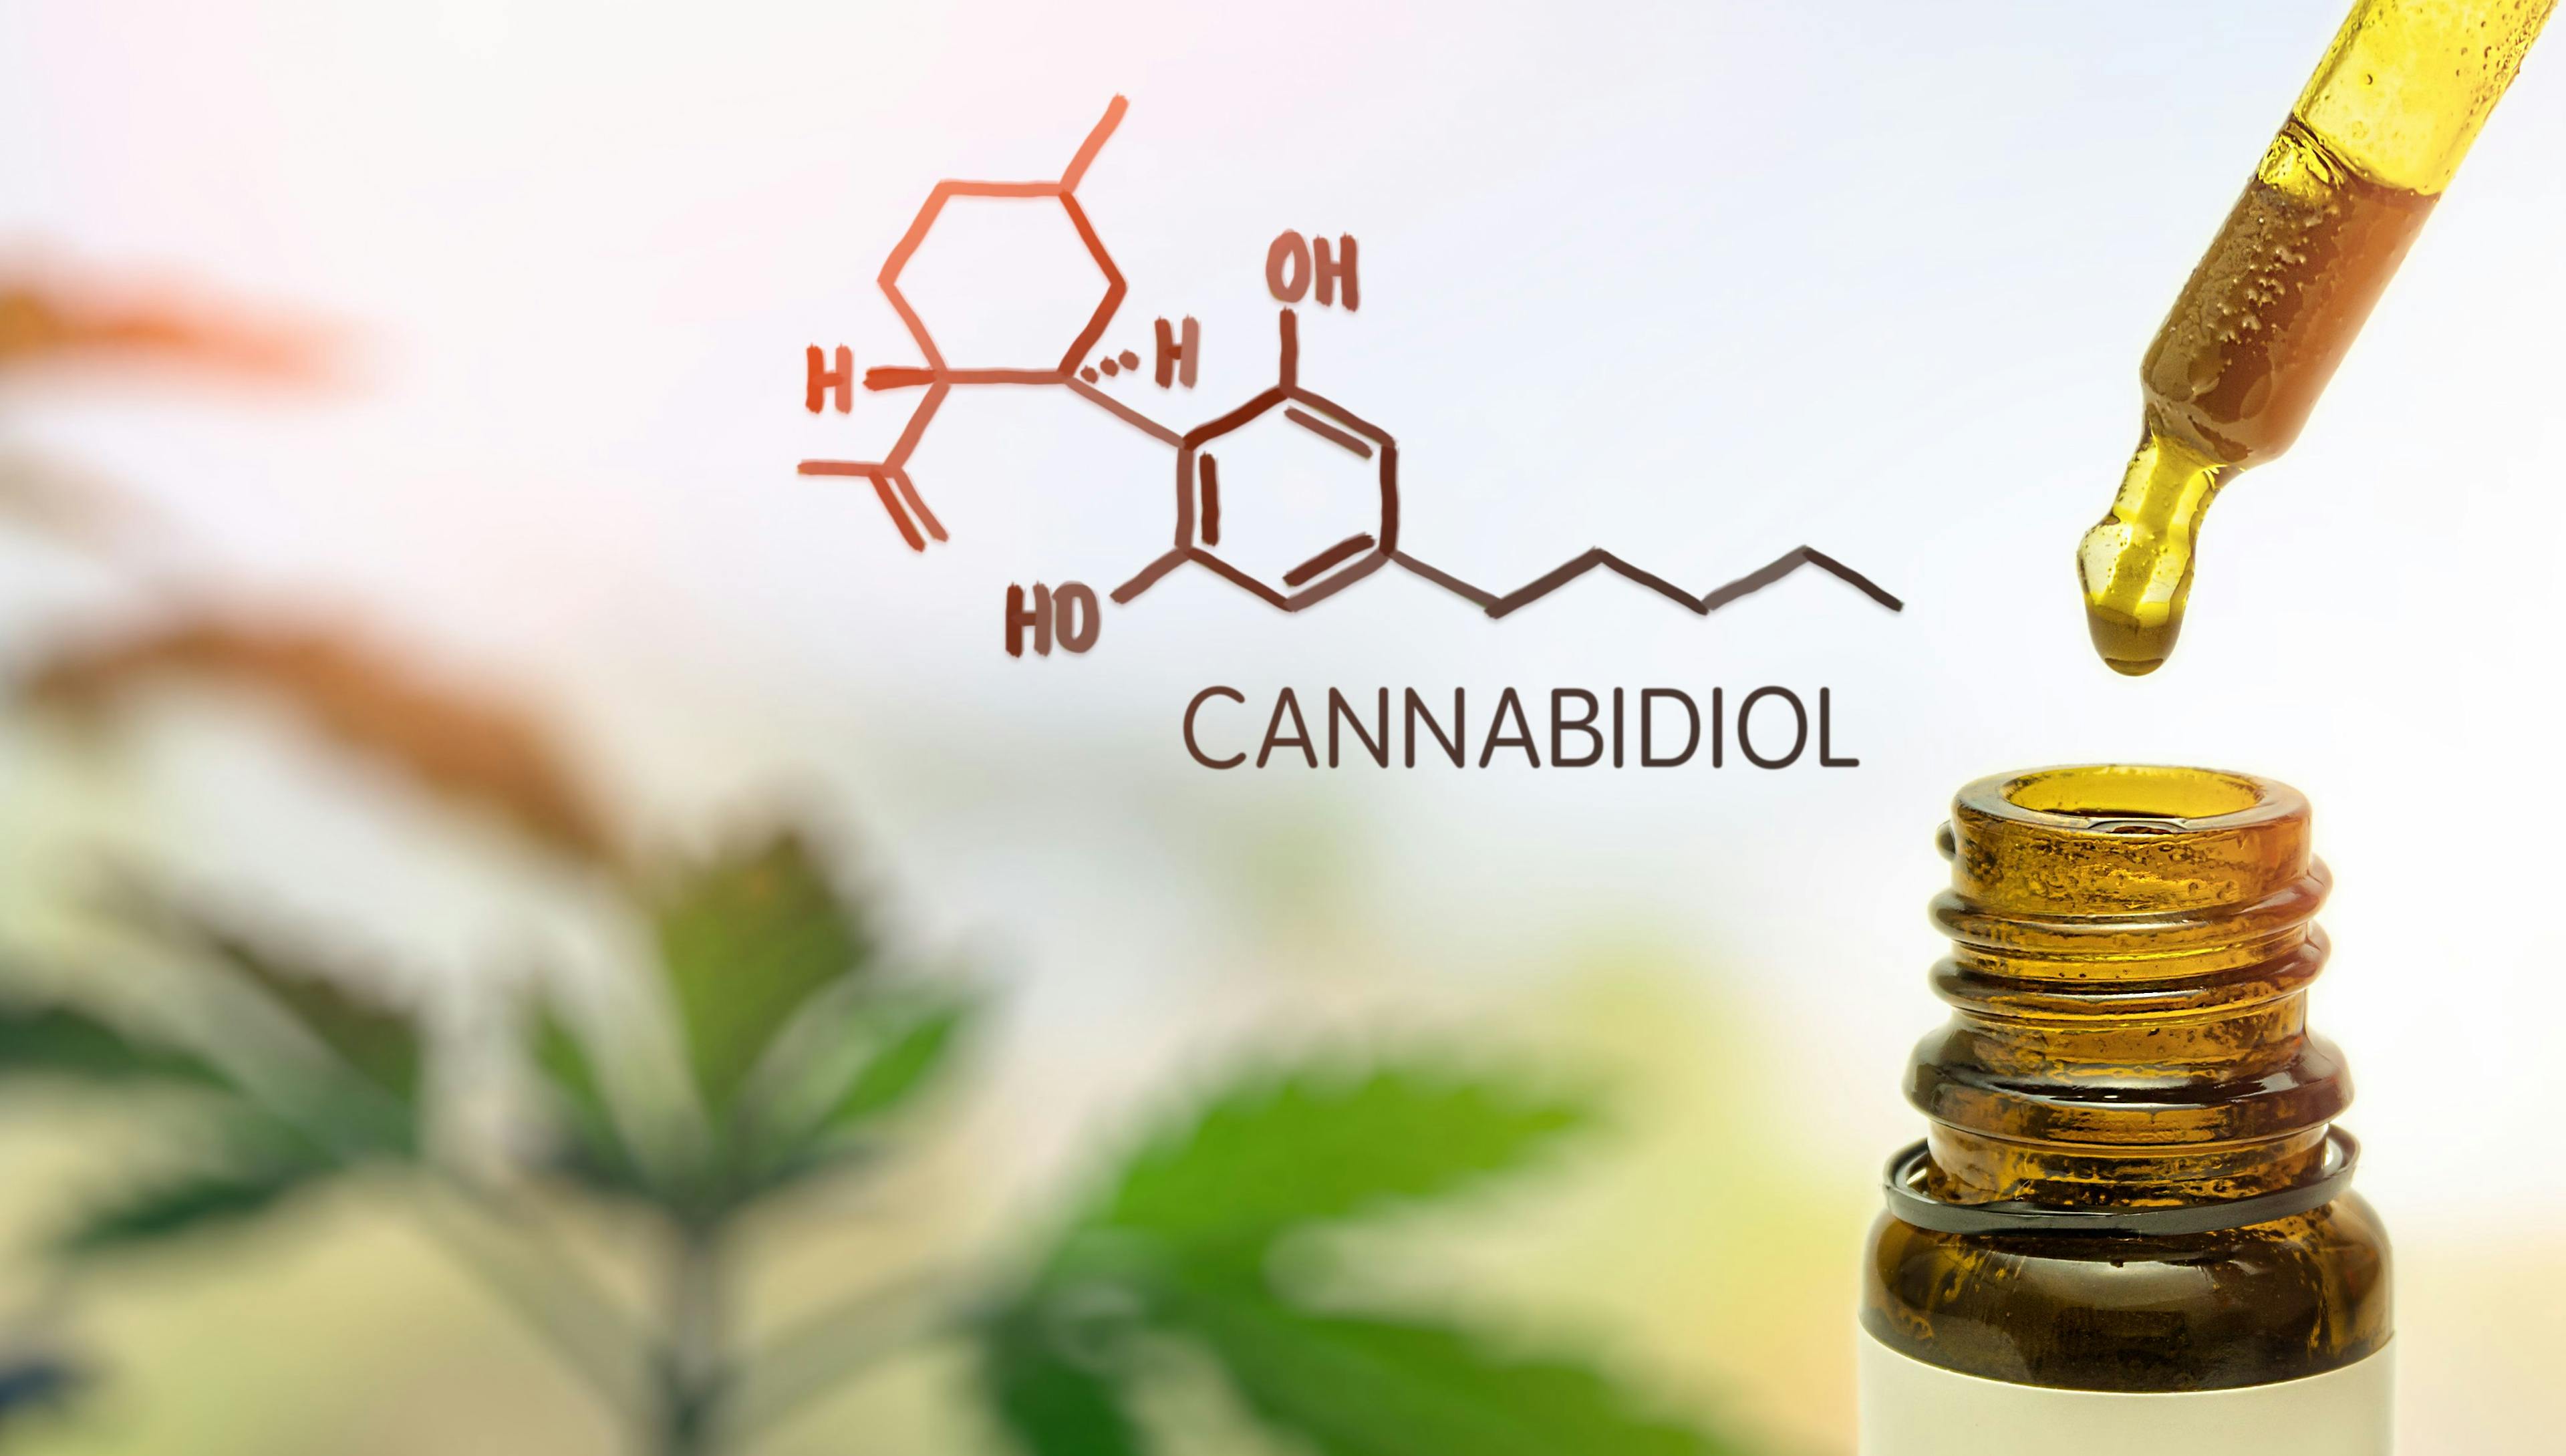 Strides in Research are Happening for CBD, But More Work is Needed